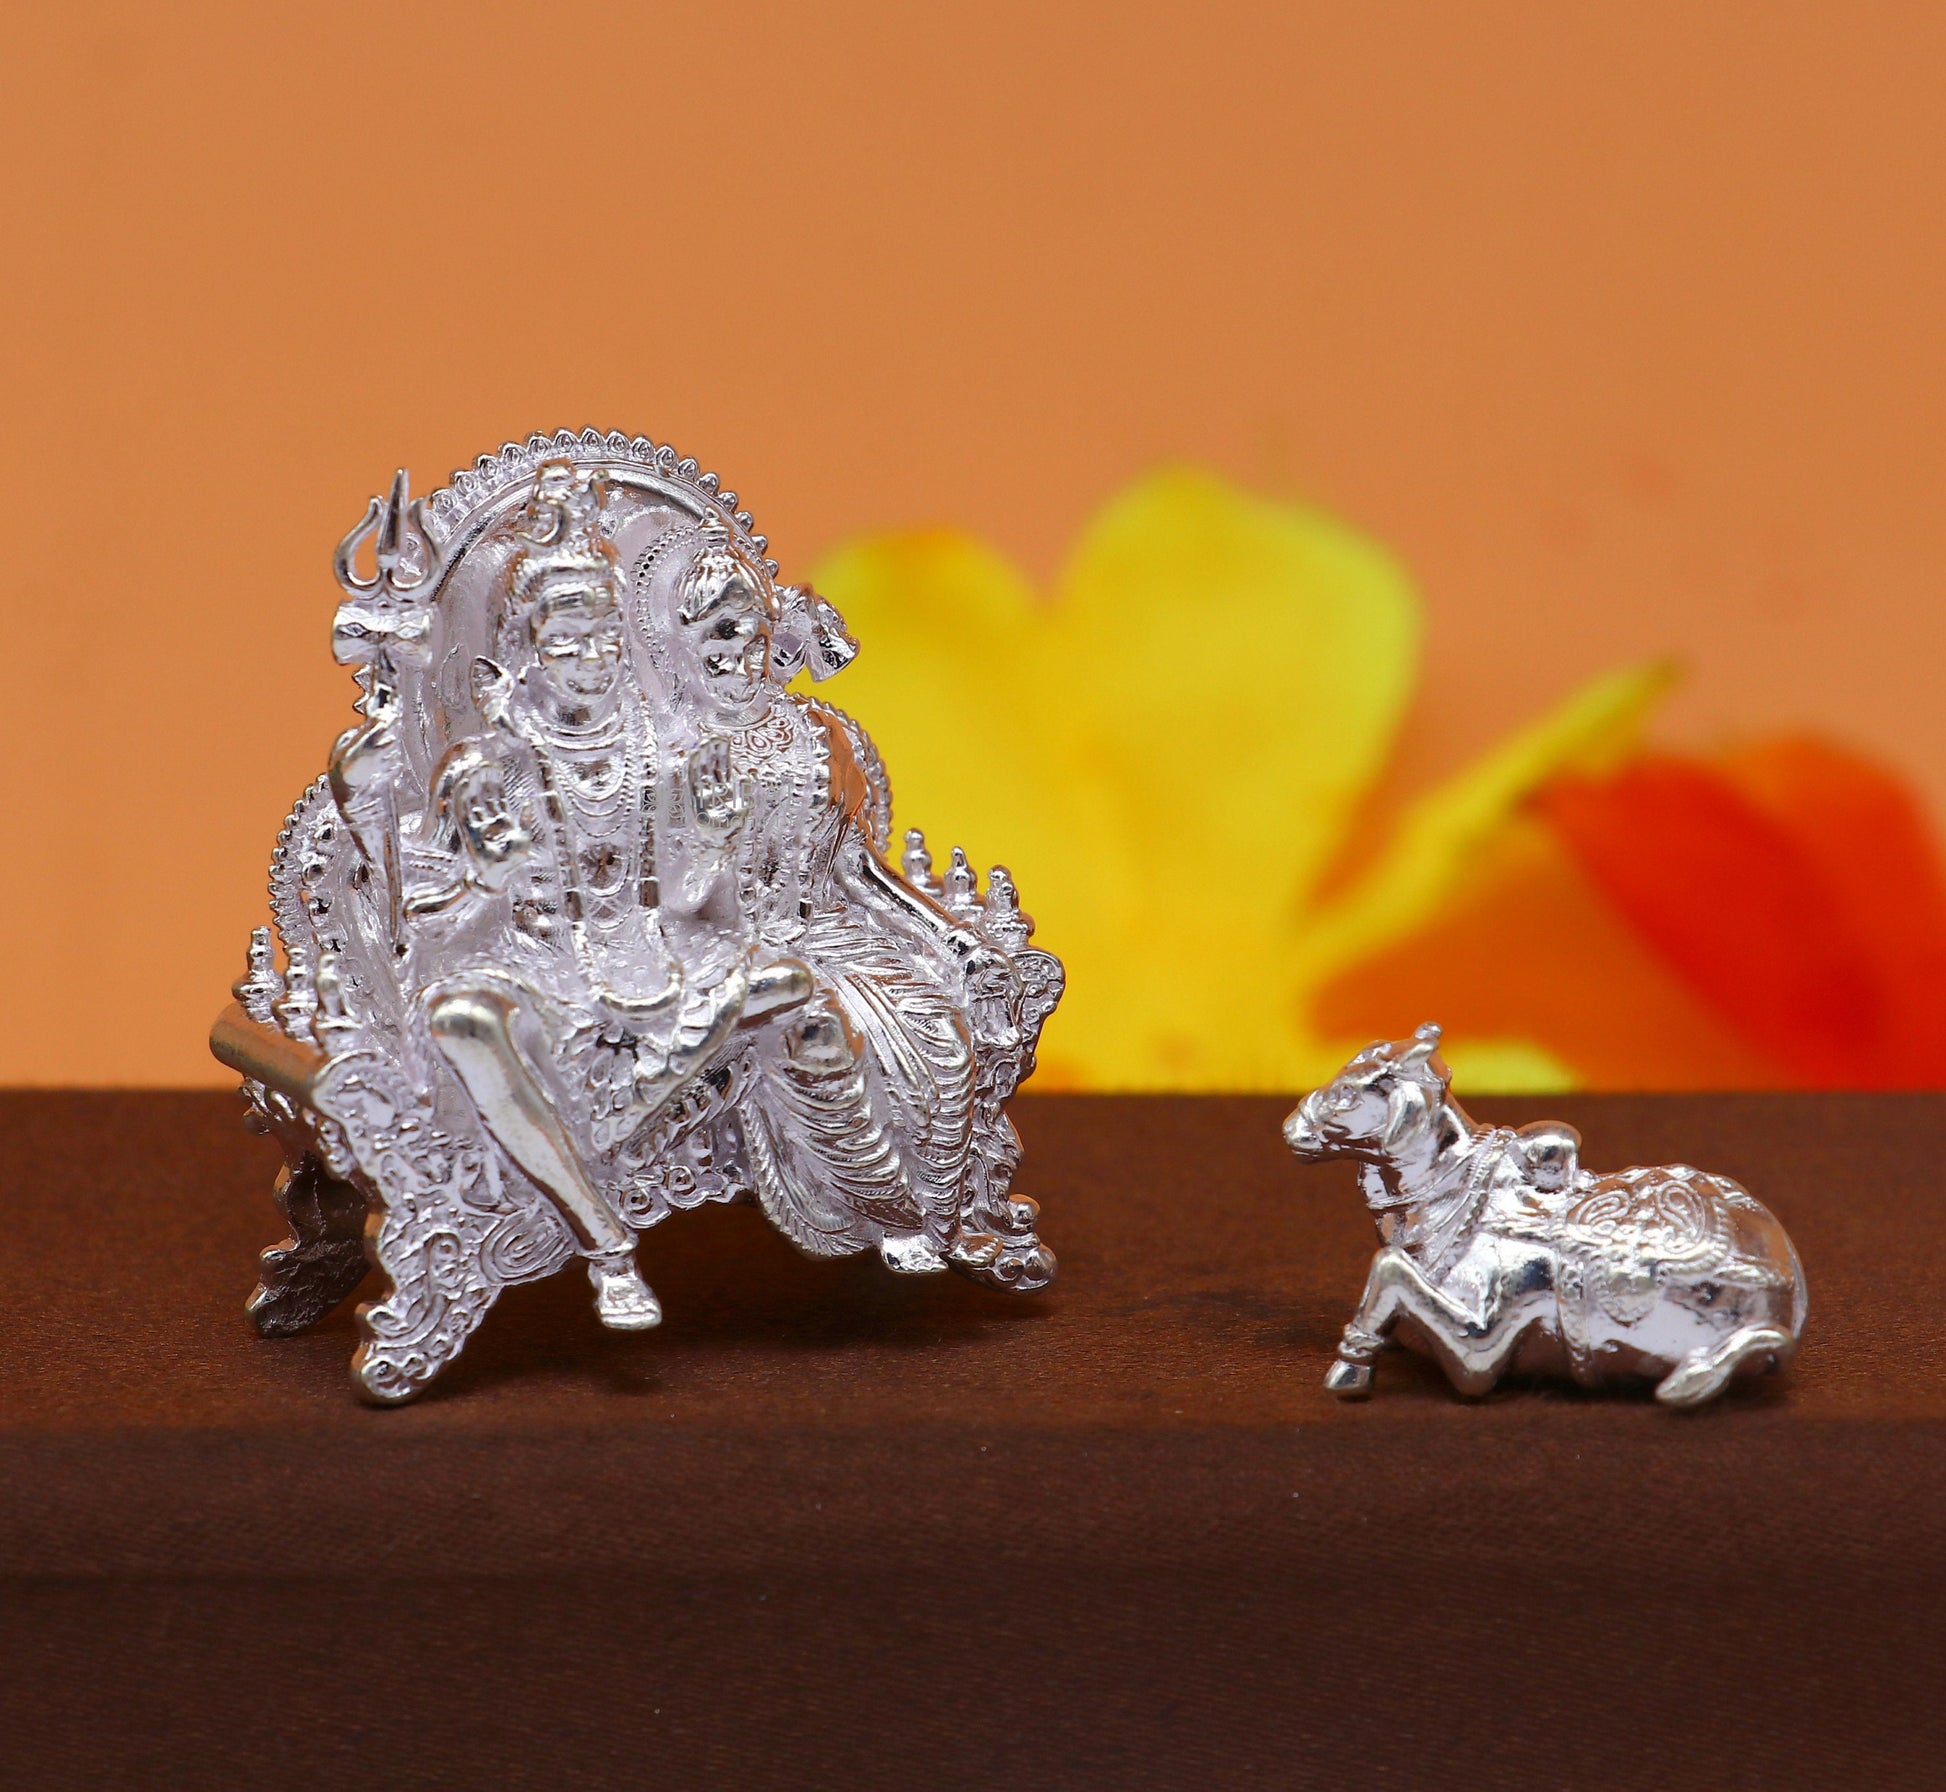 925 Sterling silver idols Lord Shiva and goddess Parwati maa and nandi divine statue figurine, puja articles best gift silver article art724 - TRIBAL ORNAMENTS